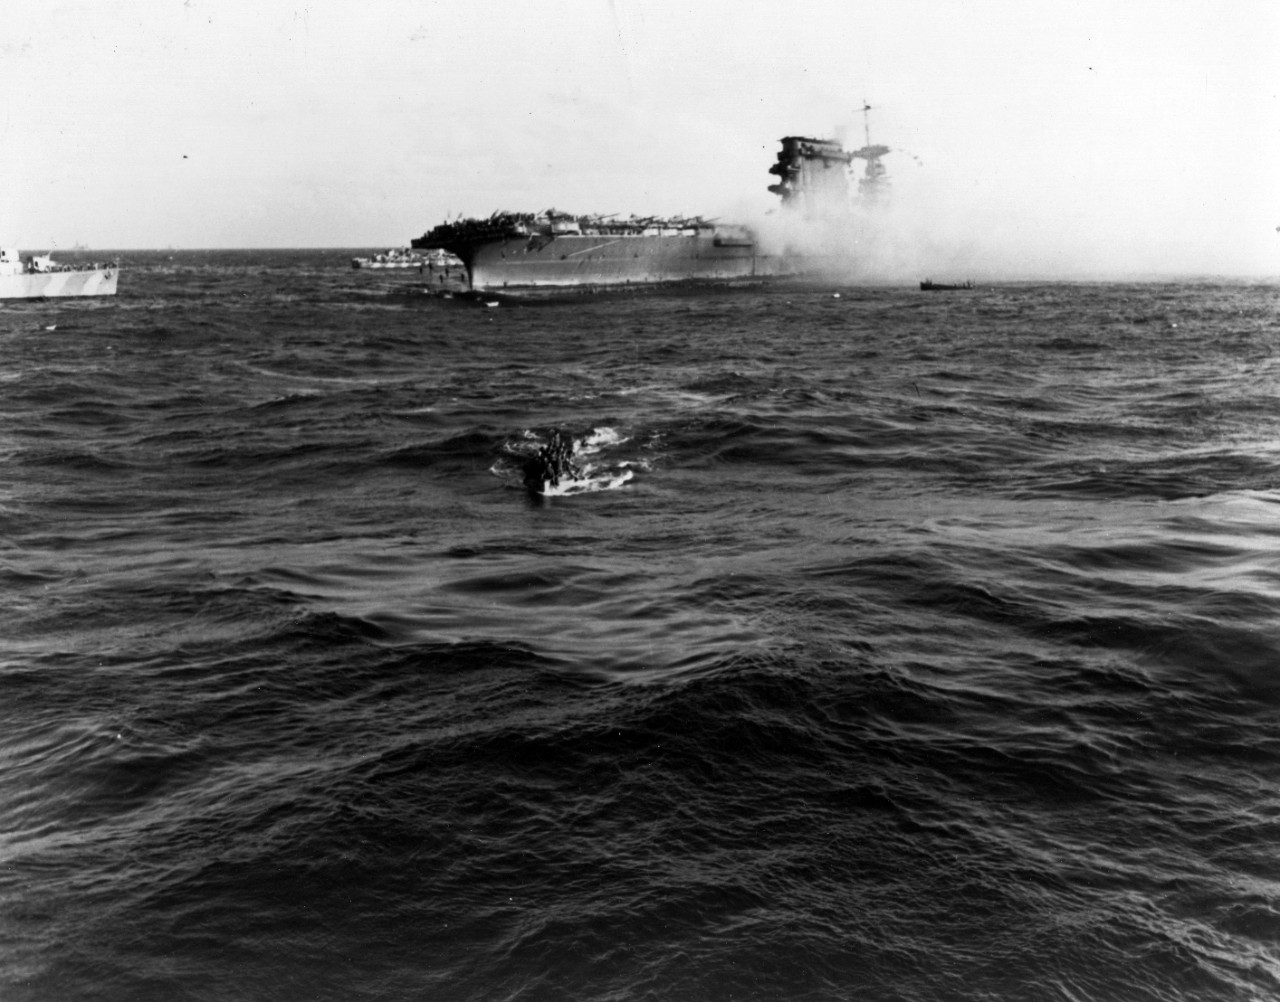 Photo #: 80-G-7417  Battle of the Coral Sea, May 1942